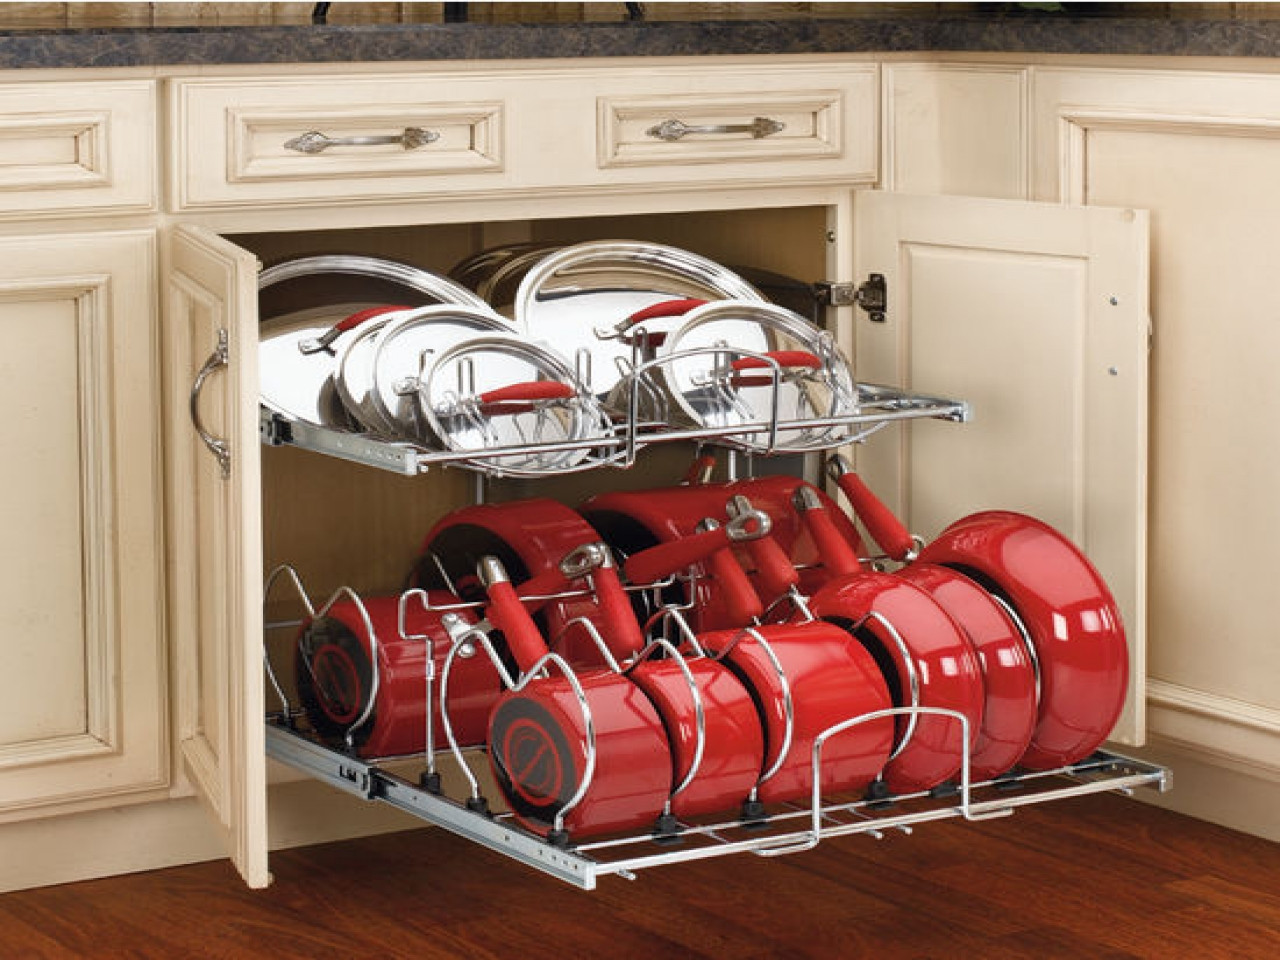 Kitchen Pots And Pans Organizer
 New Pots And Pans Pull Out Rack &NH37 – Roc munity